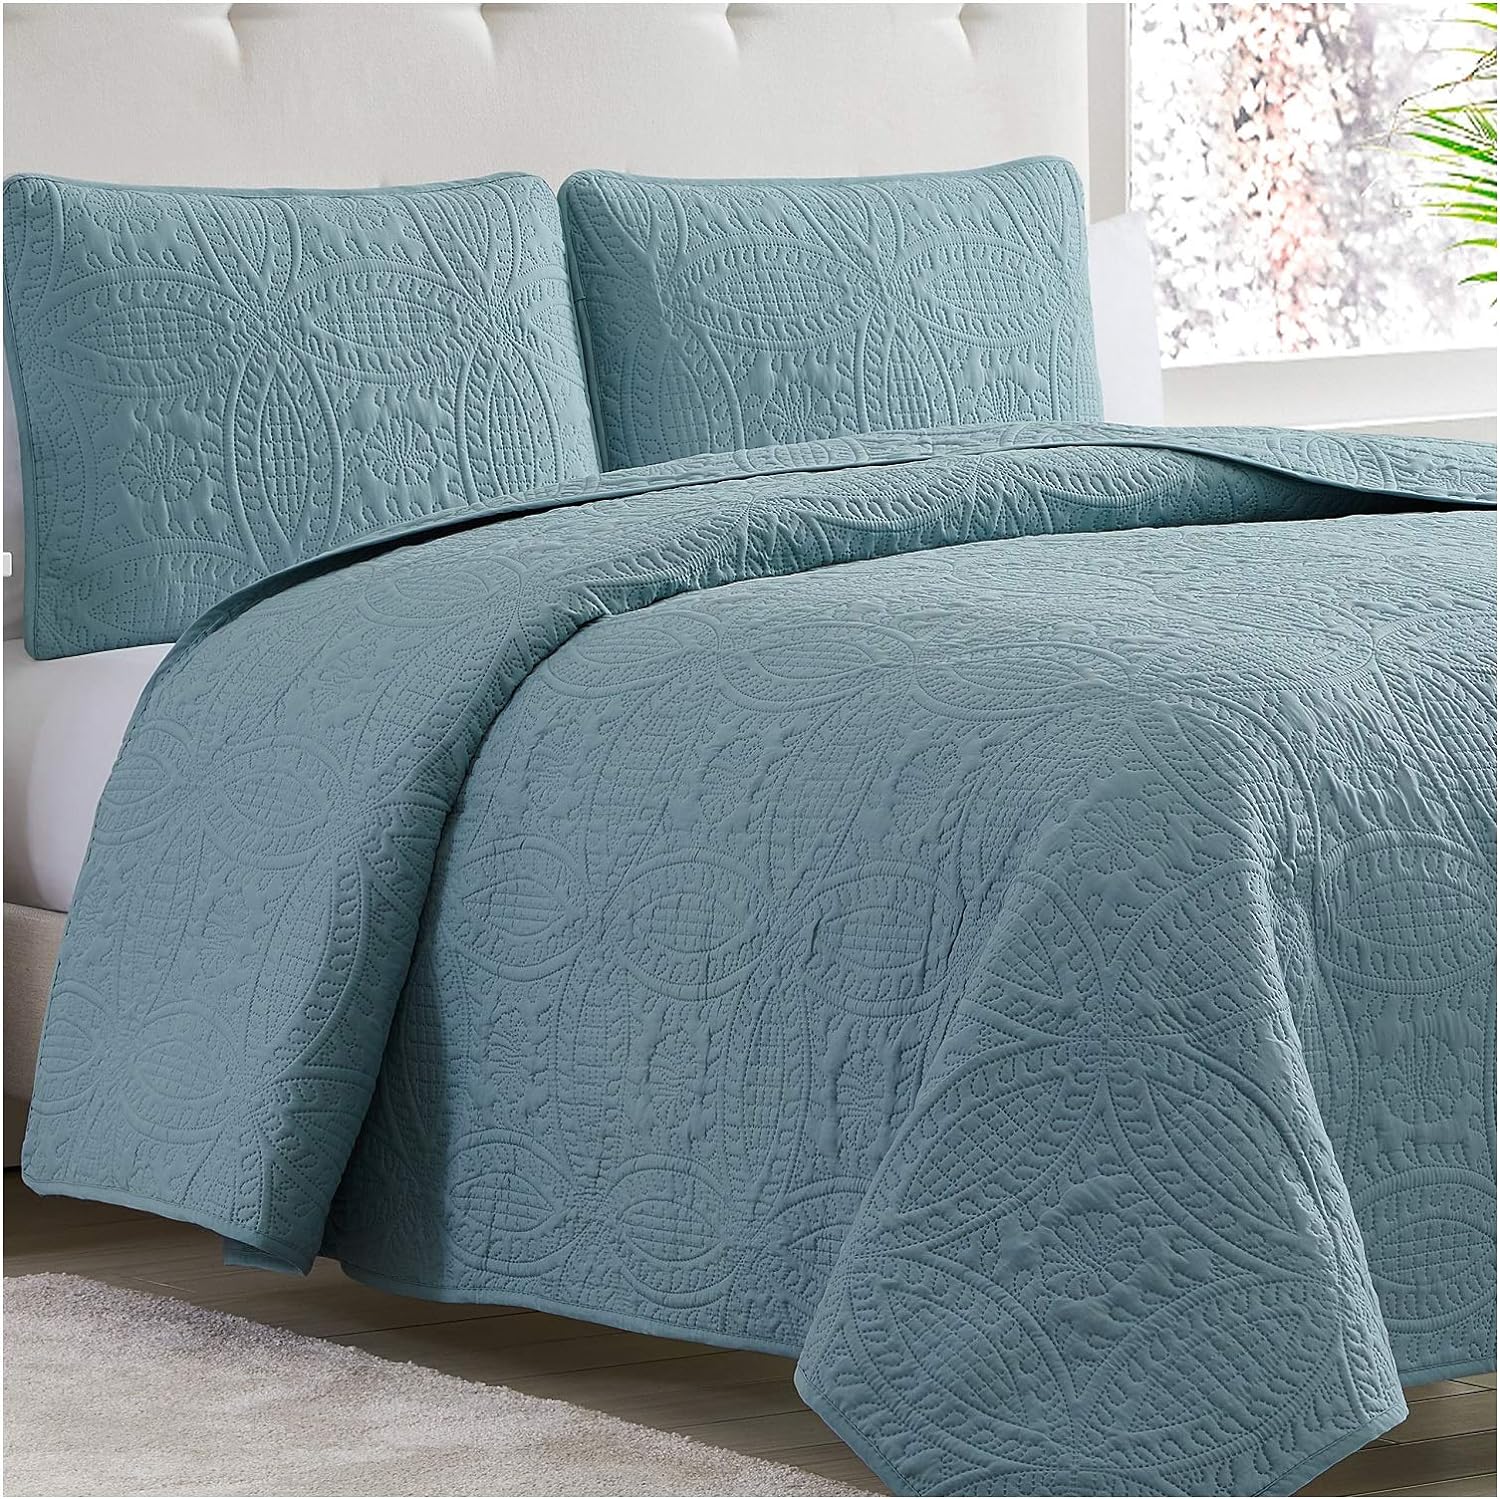 Mellanni Bedspread Coverlet Set - Bedding Cover with Shams - Ultrasonic Quilting Technology - 3 Piece Oversized Full/Queen Quilt Set - Bedspreads & Coverlets (Full/Queen, Spa Blue) 